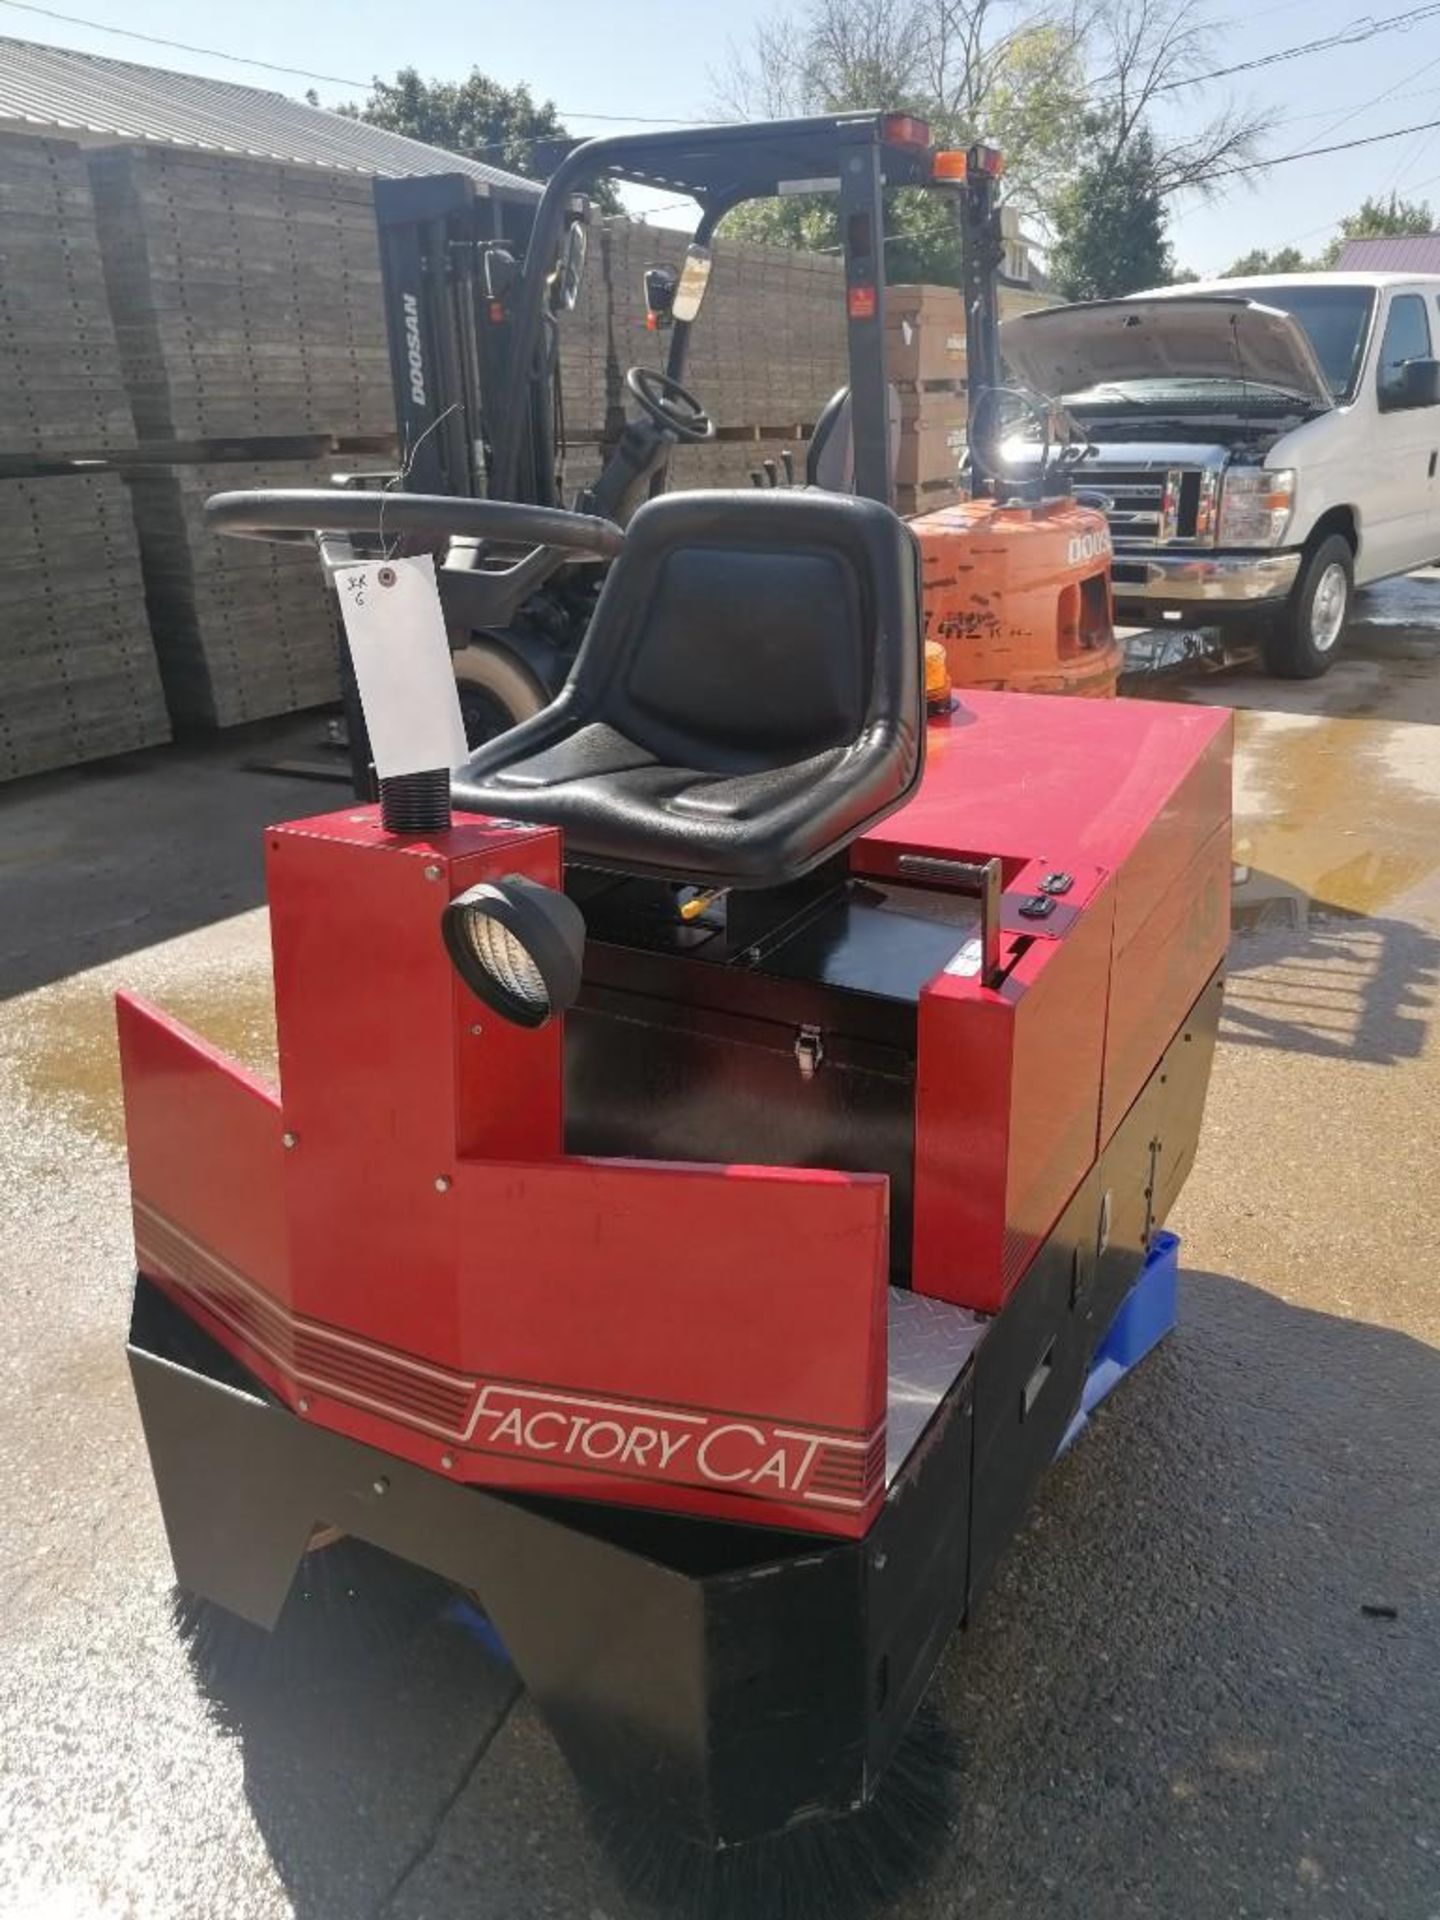 Factory Cat 48 Industrial Sweeper, Serial #JE48-5705, 137 Hours, Model 48. Located at 301 E Henry - Image 2 of 9